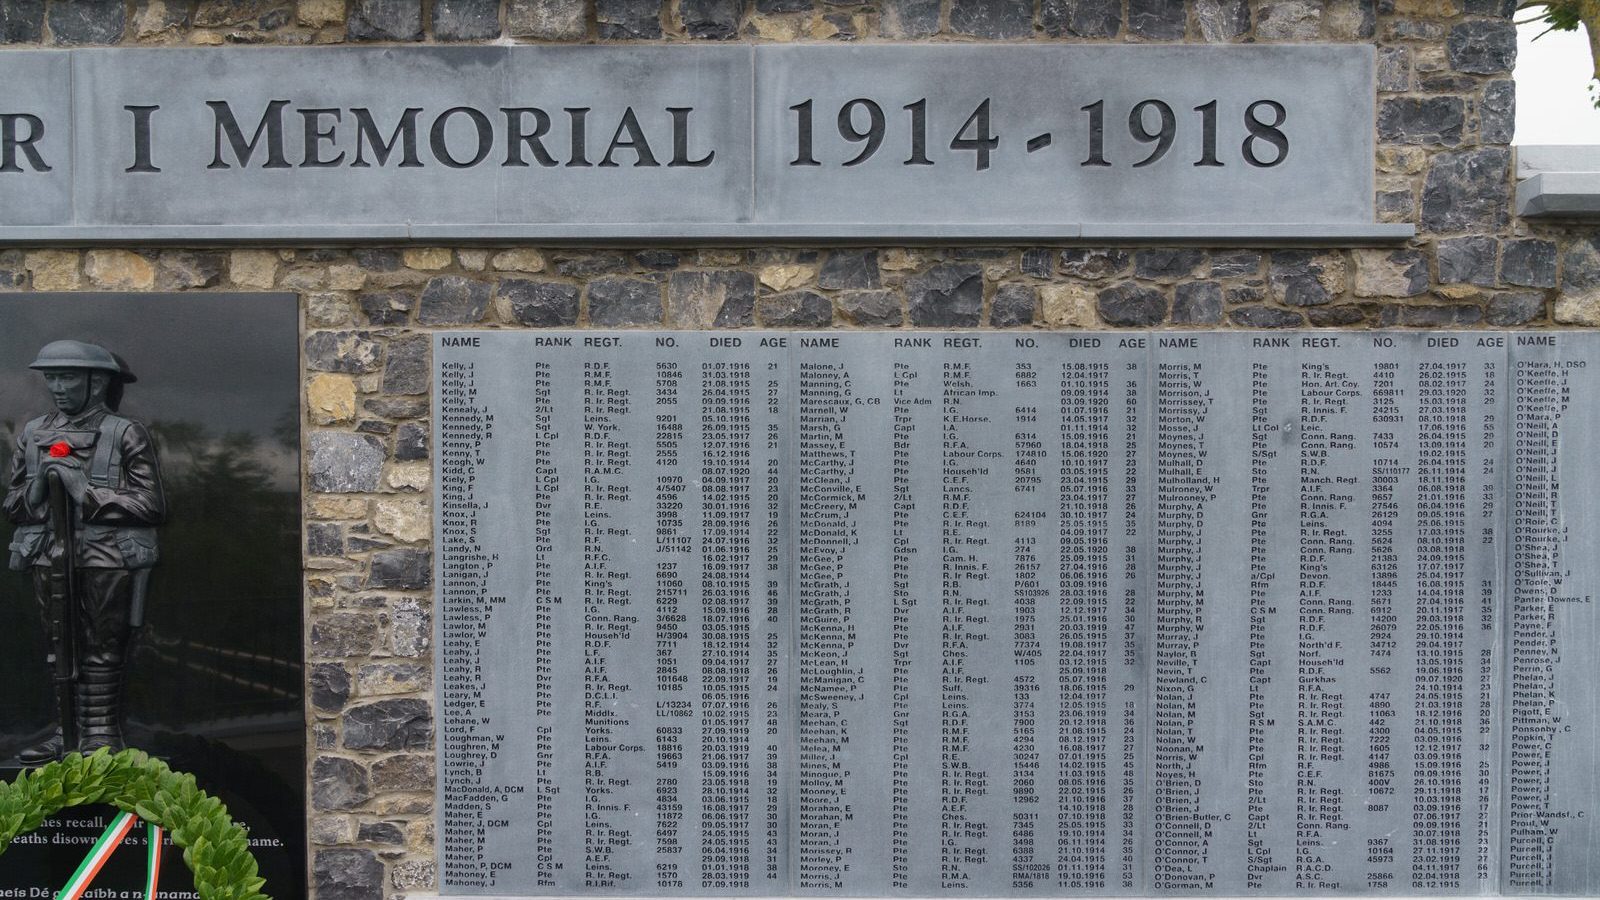 THE FIRST WORLD WAR MEMORIAL UNVEILED IN 2018 AT THE PEACE PARK IN KILKENNY [ALSO THE STORY OF 14 YEAR OLD THOMAS WOODGATE]-226812-1